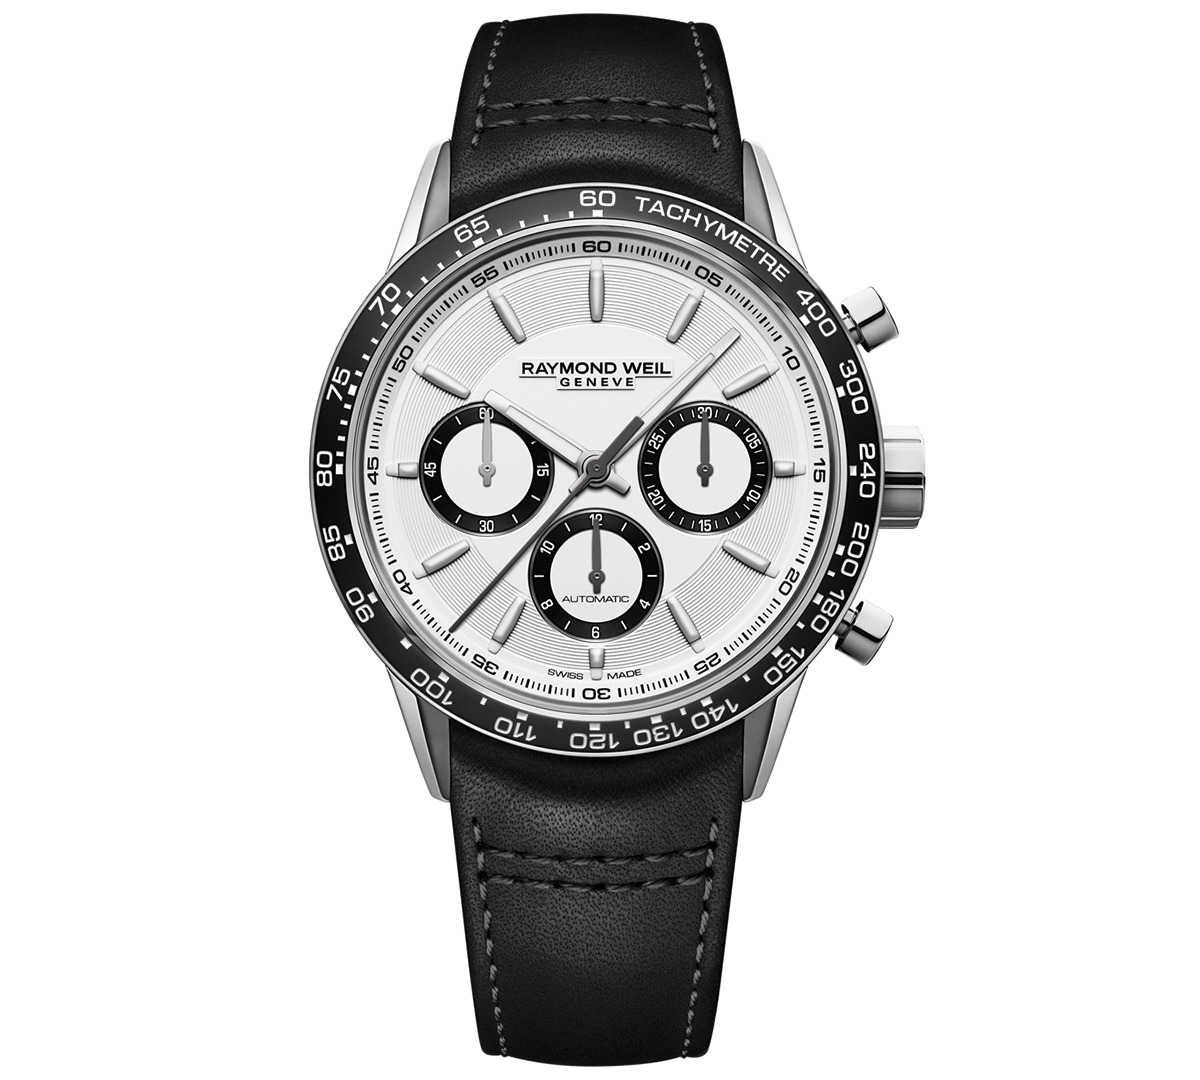 Raymond Weil Men's Swiss Automatic Chronograph Freelancer Black Leather Strap Watch 43.5mm In Black / White